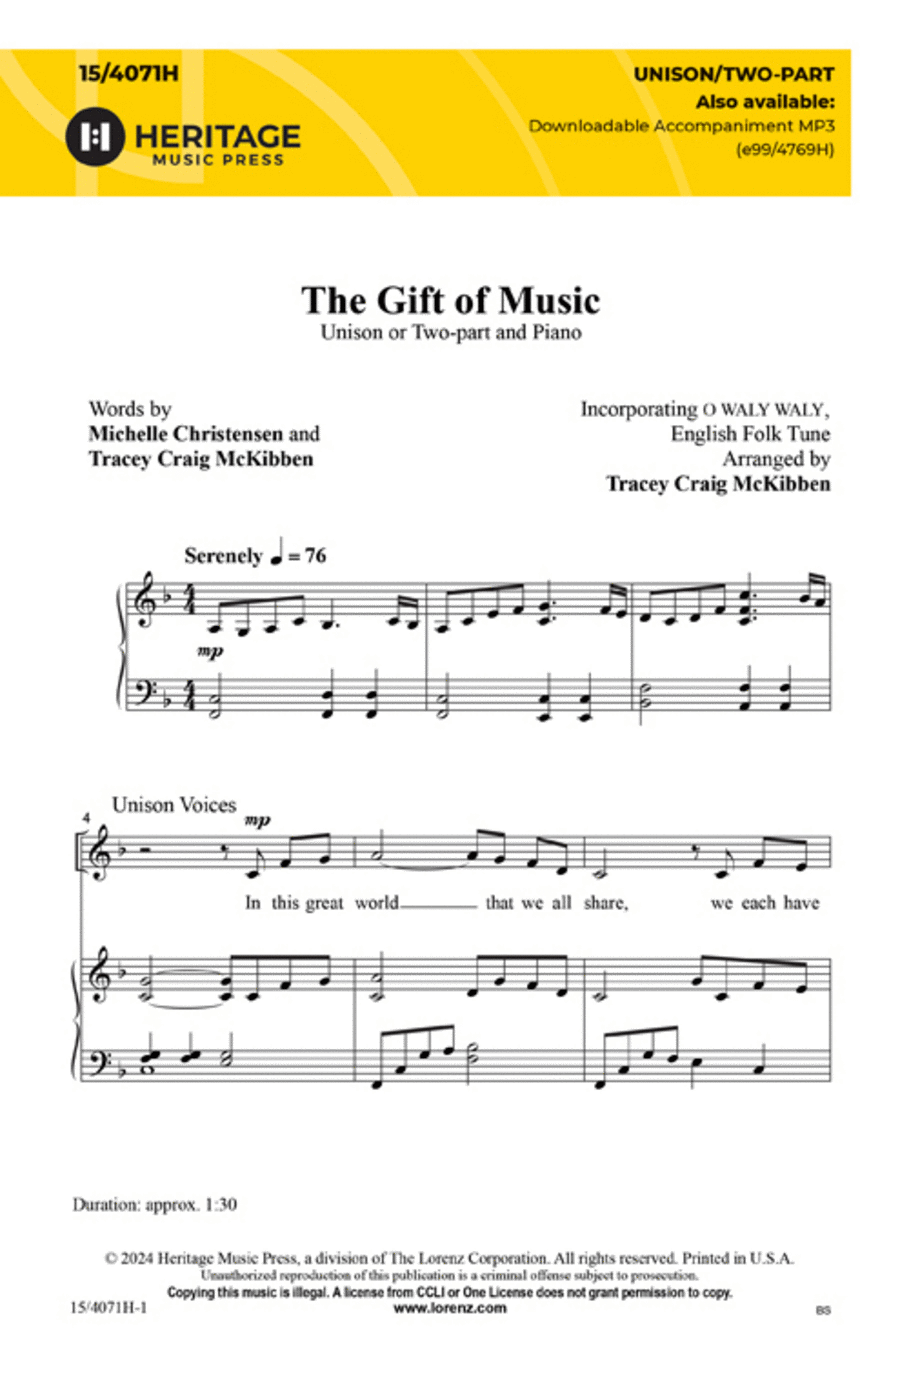 The Gift of Music